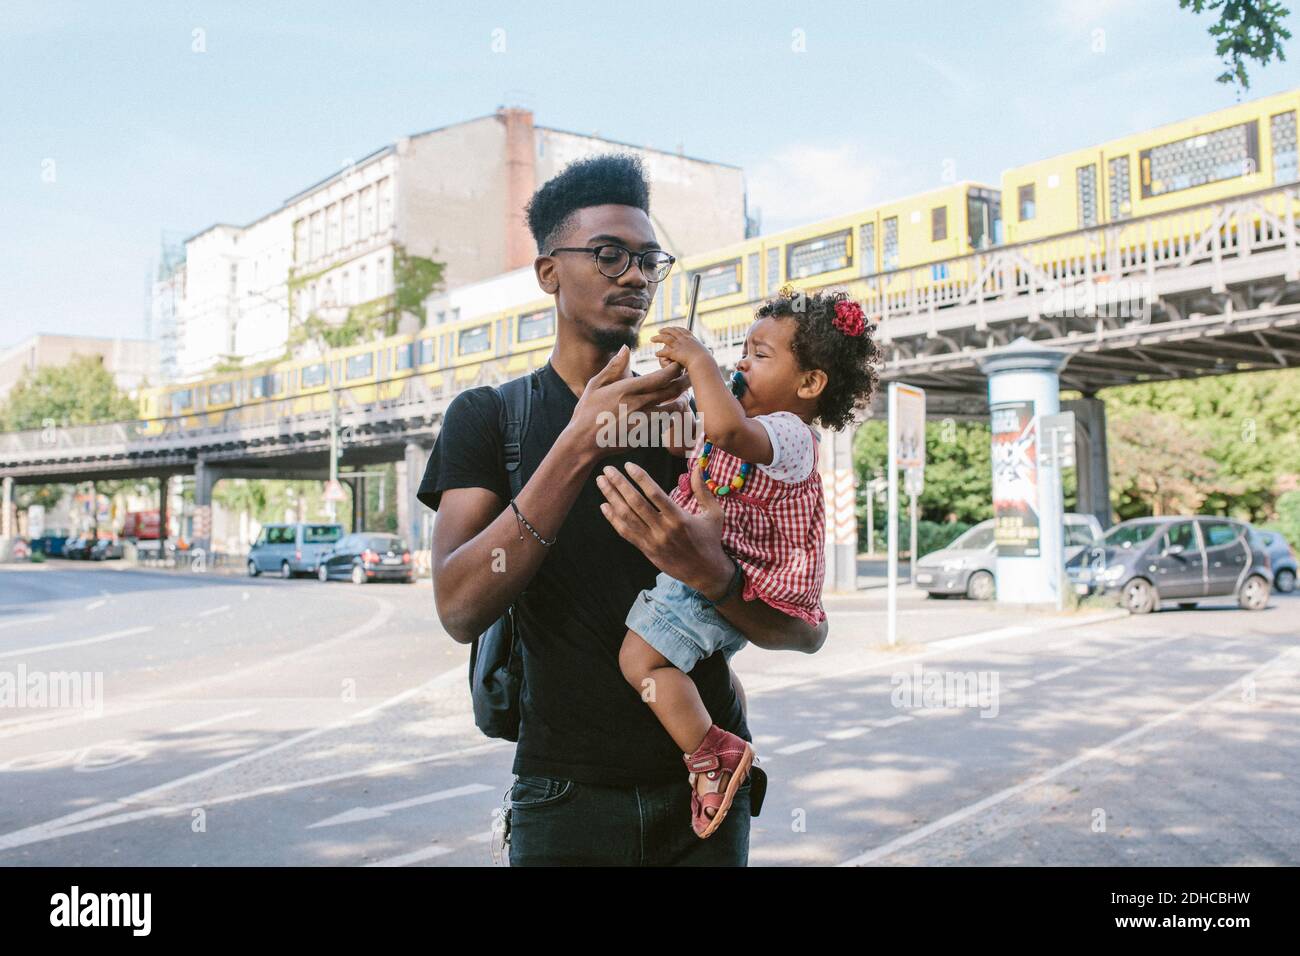 Young man carrying daughter holding mobile phone while standing on street against railway bridge Stock Photo